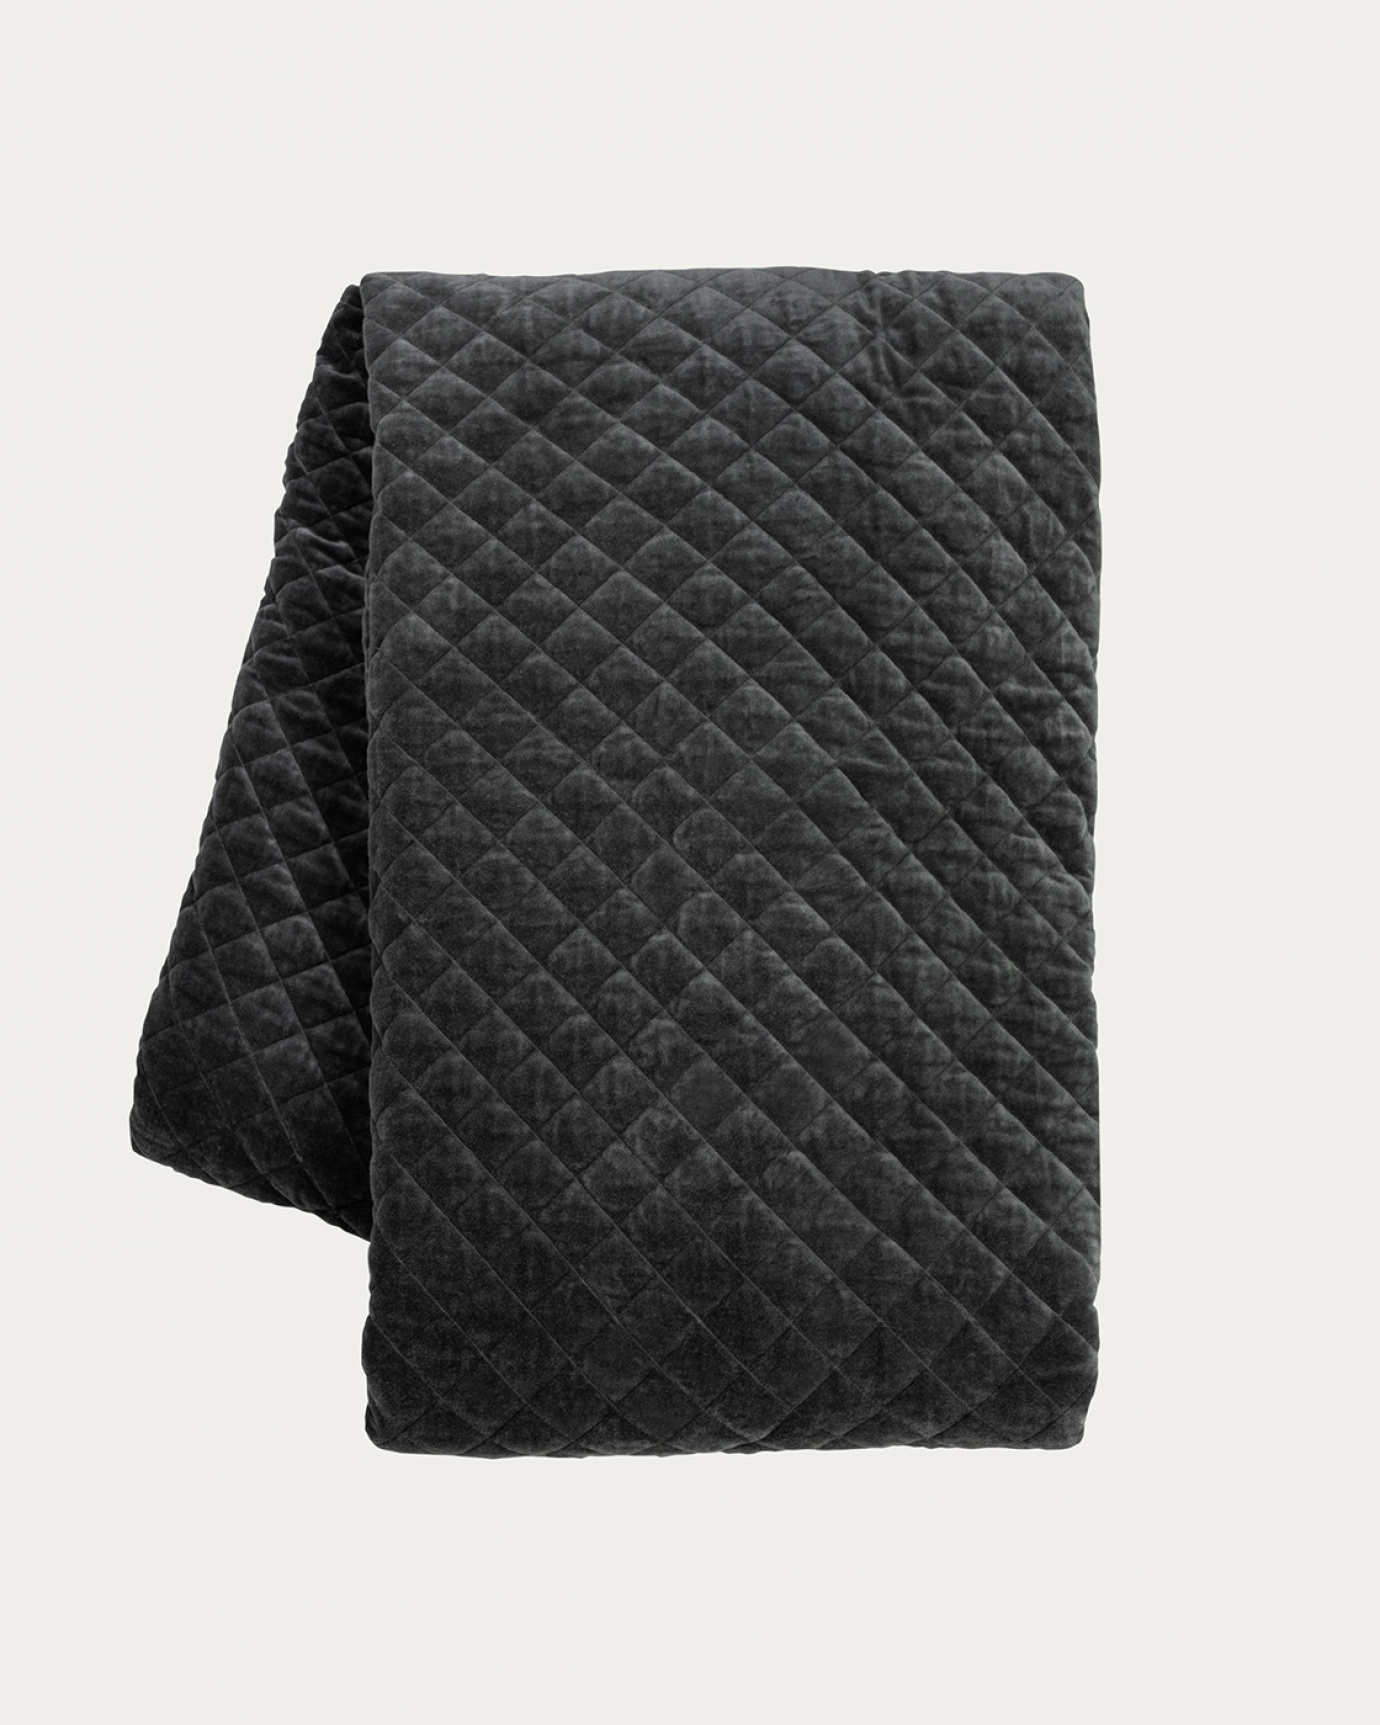 Product image dark charcoal grey PICCOLO bedspread in soft cotton velvet for single bed from LINUM DESIGN. Size 170x260 cm.